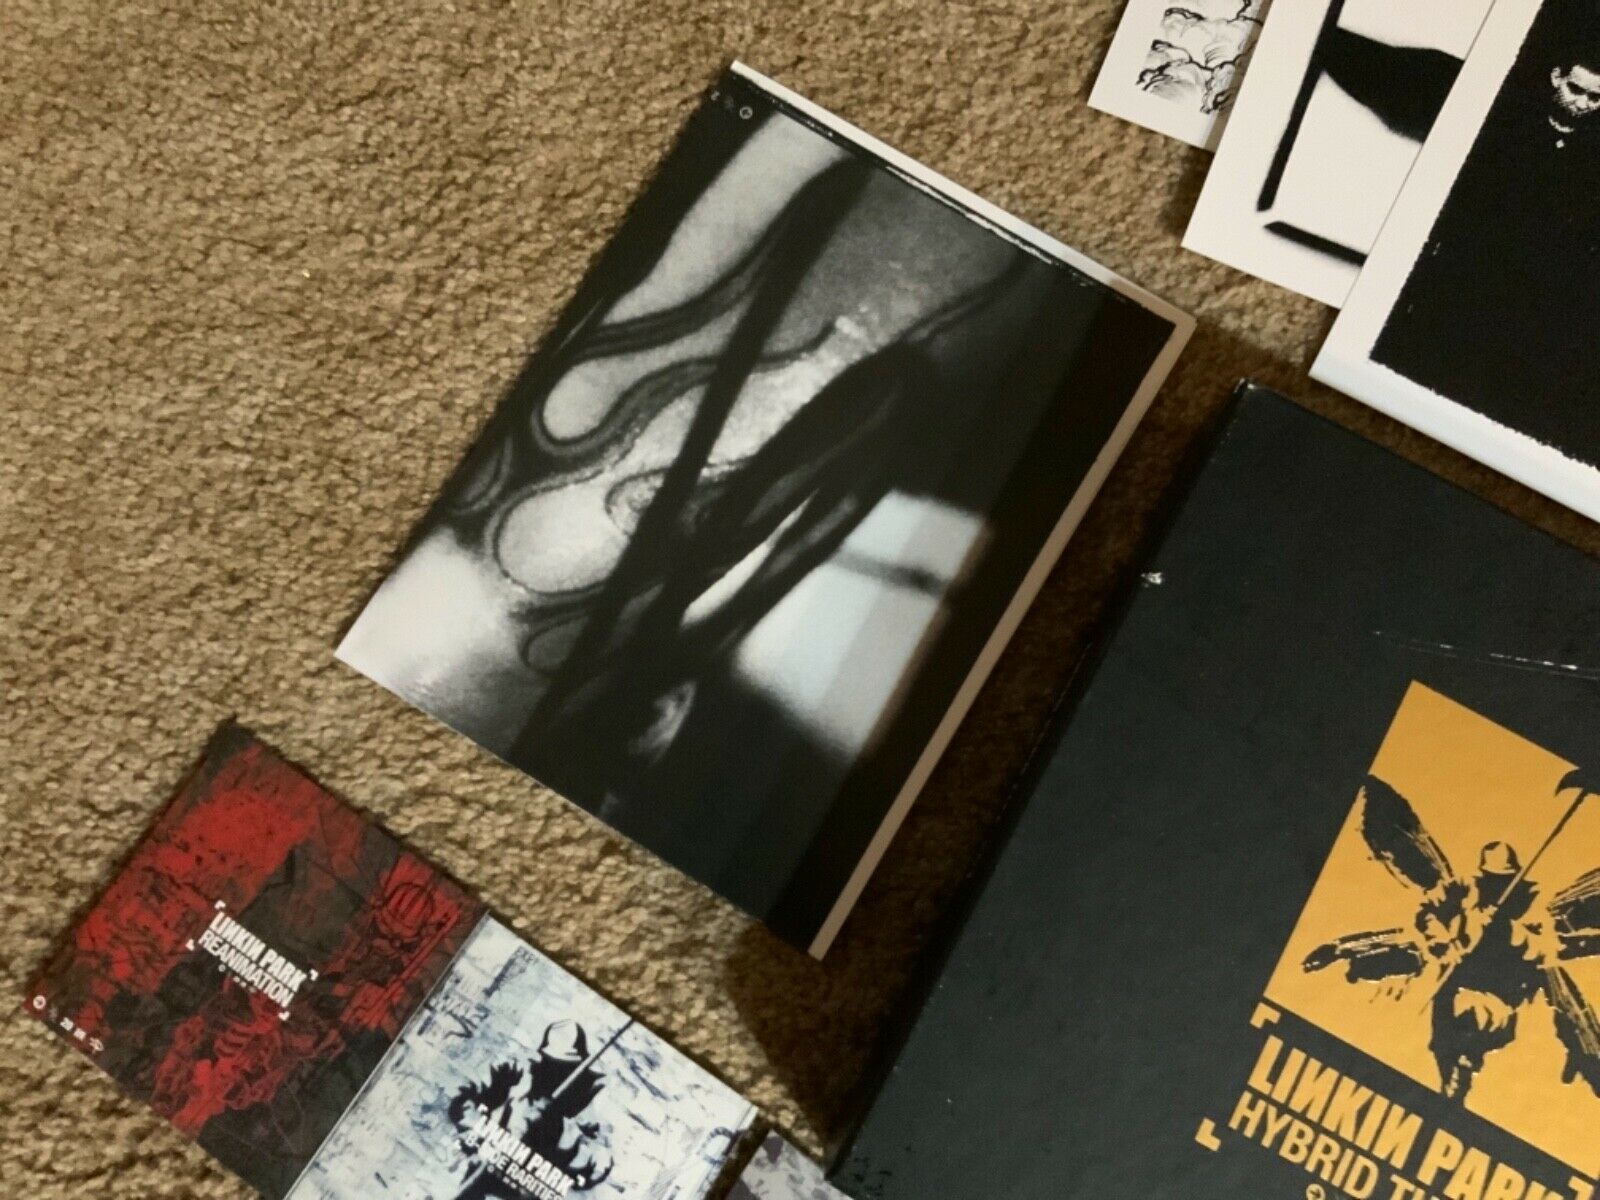  Hybrid Theory (20th Anniversary Edition) by Linkin Park SUPER  DELUXE Box Set - auction details